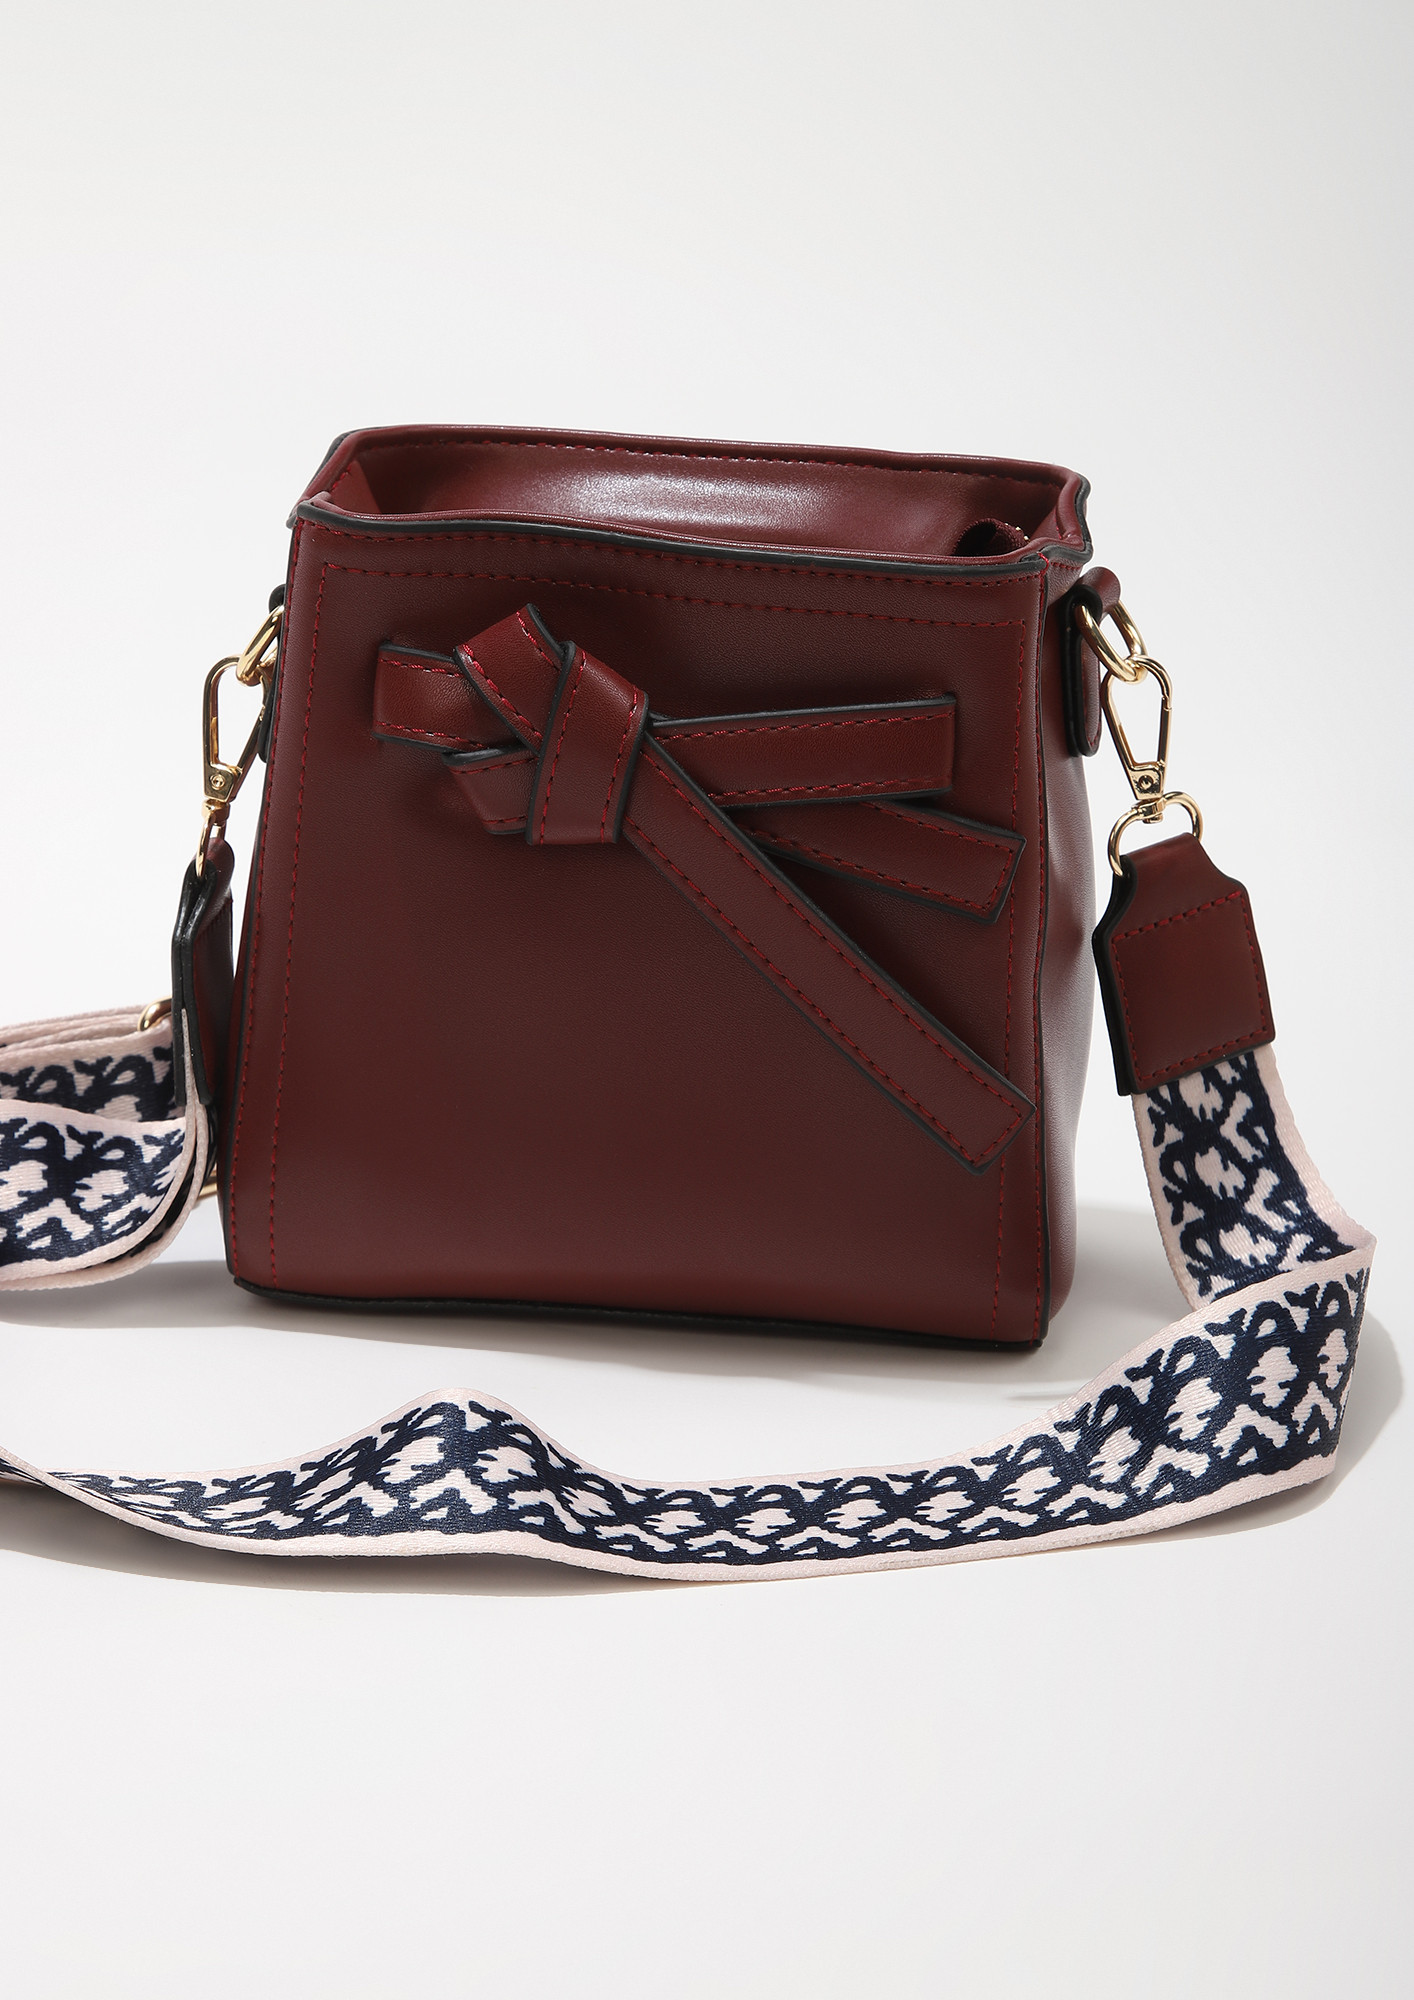 CUTE WITH A BOW WINE SLING BAG